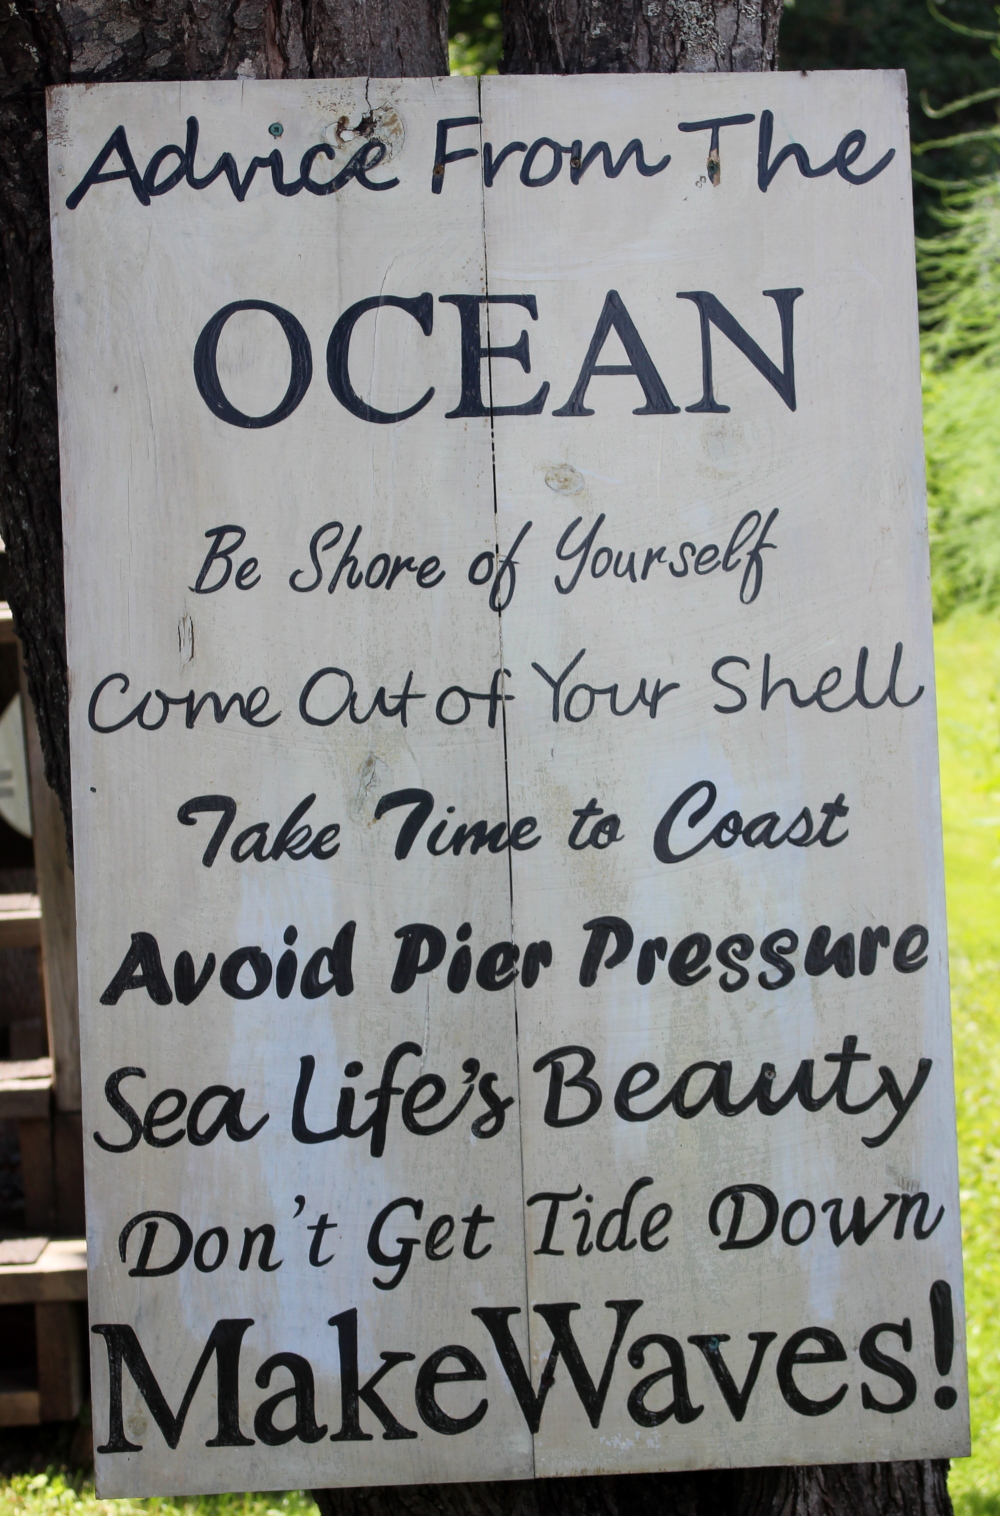 I found this awesome sign near Heather Beach.  Wise words!